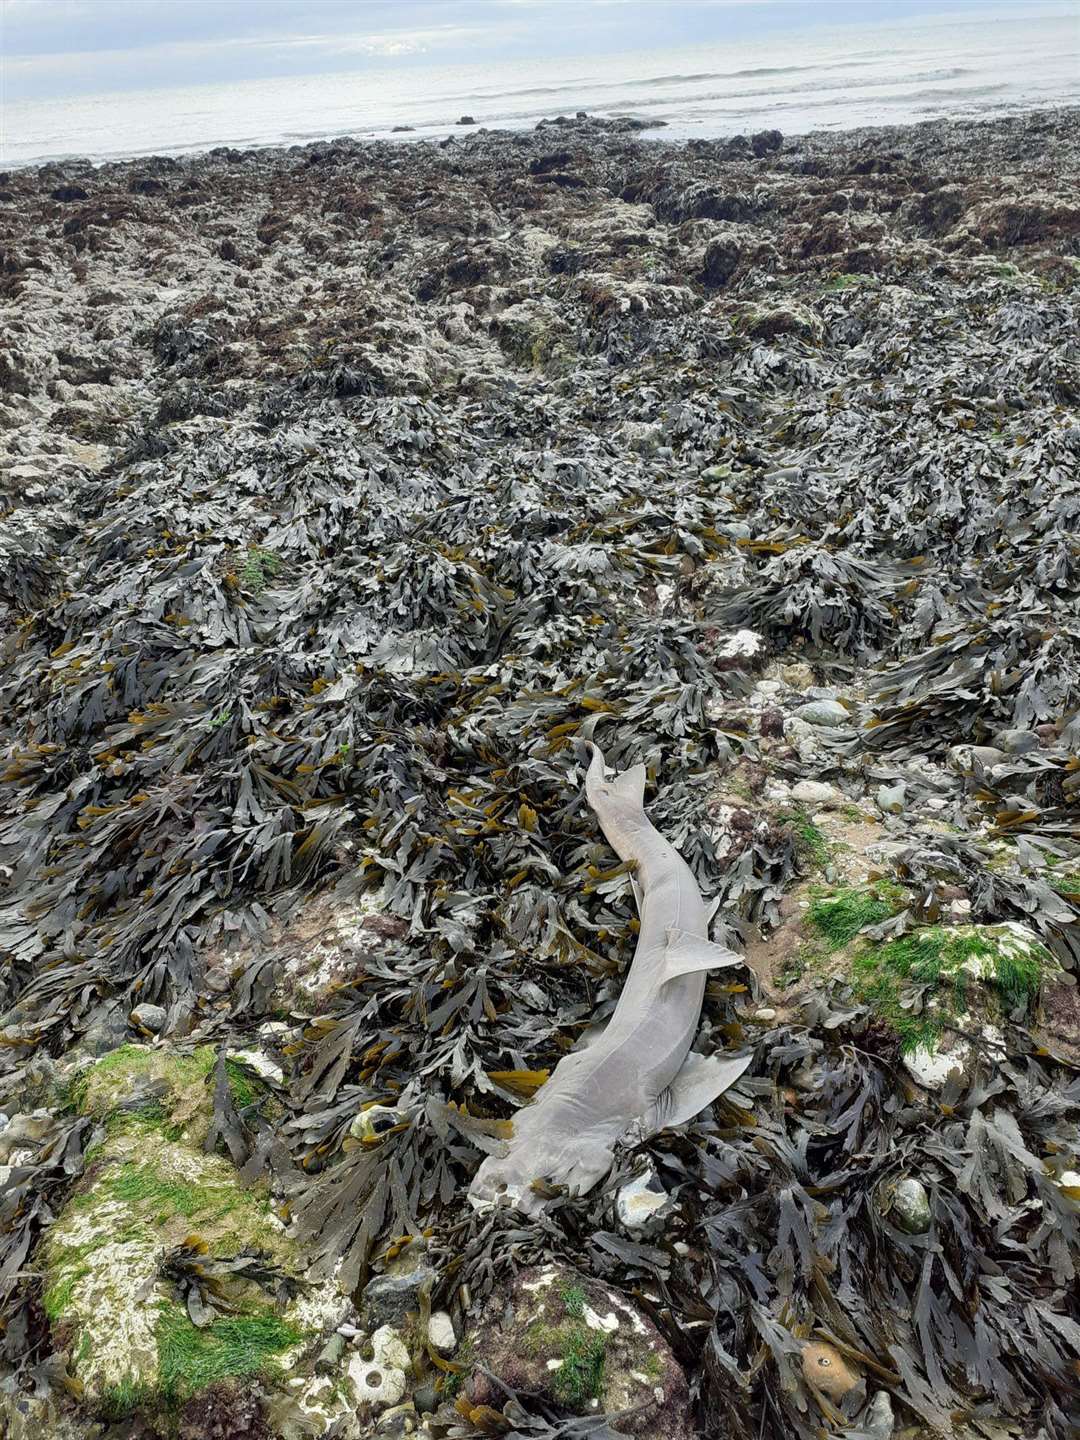 The shark, thought to be a smooth-hound, washed up on Ramsgate beach. Picture: Jan Dunn